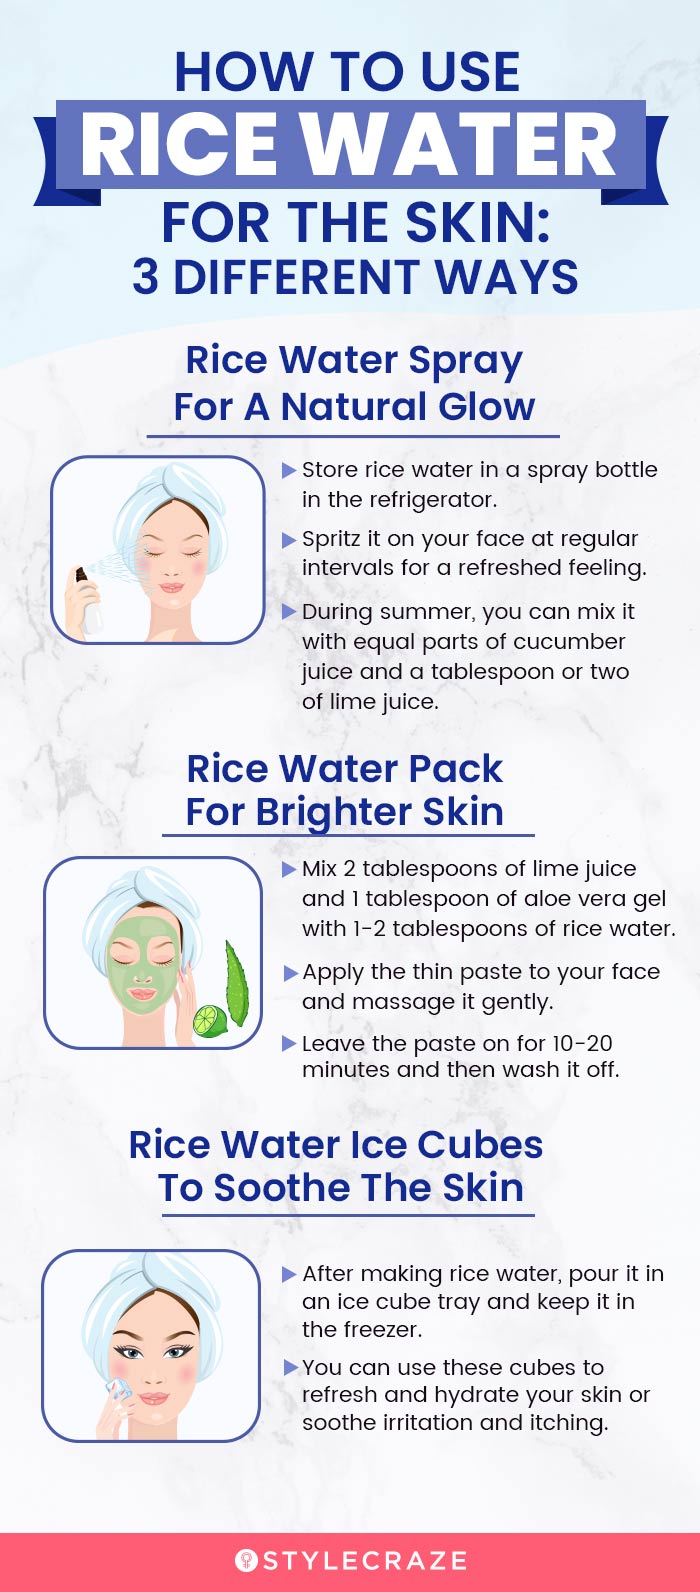 how to use rice water for skin (infographic)